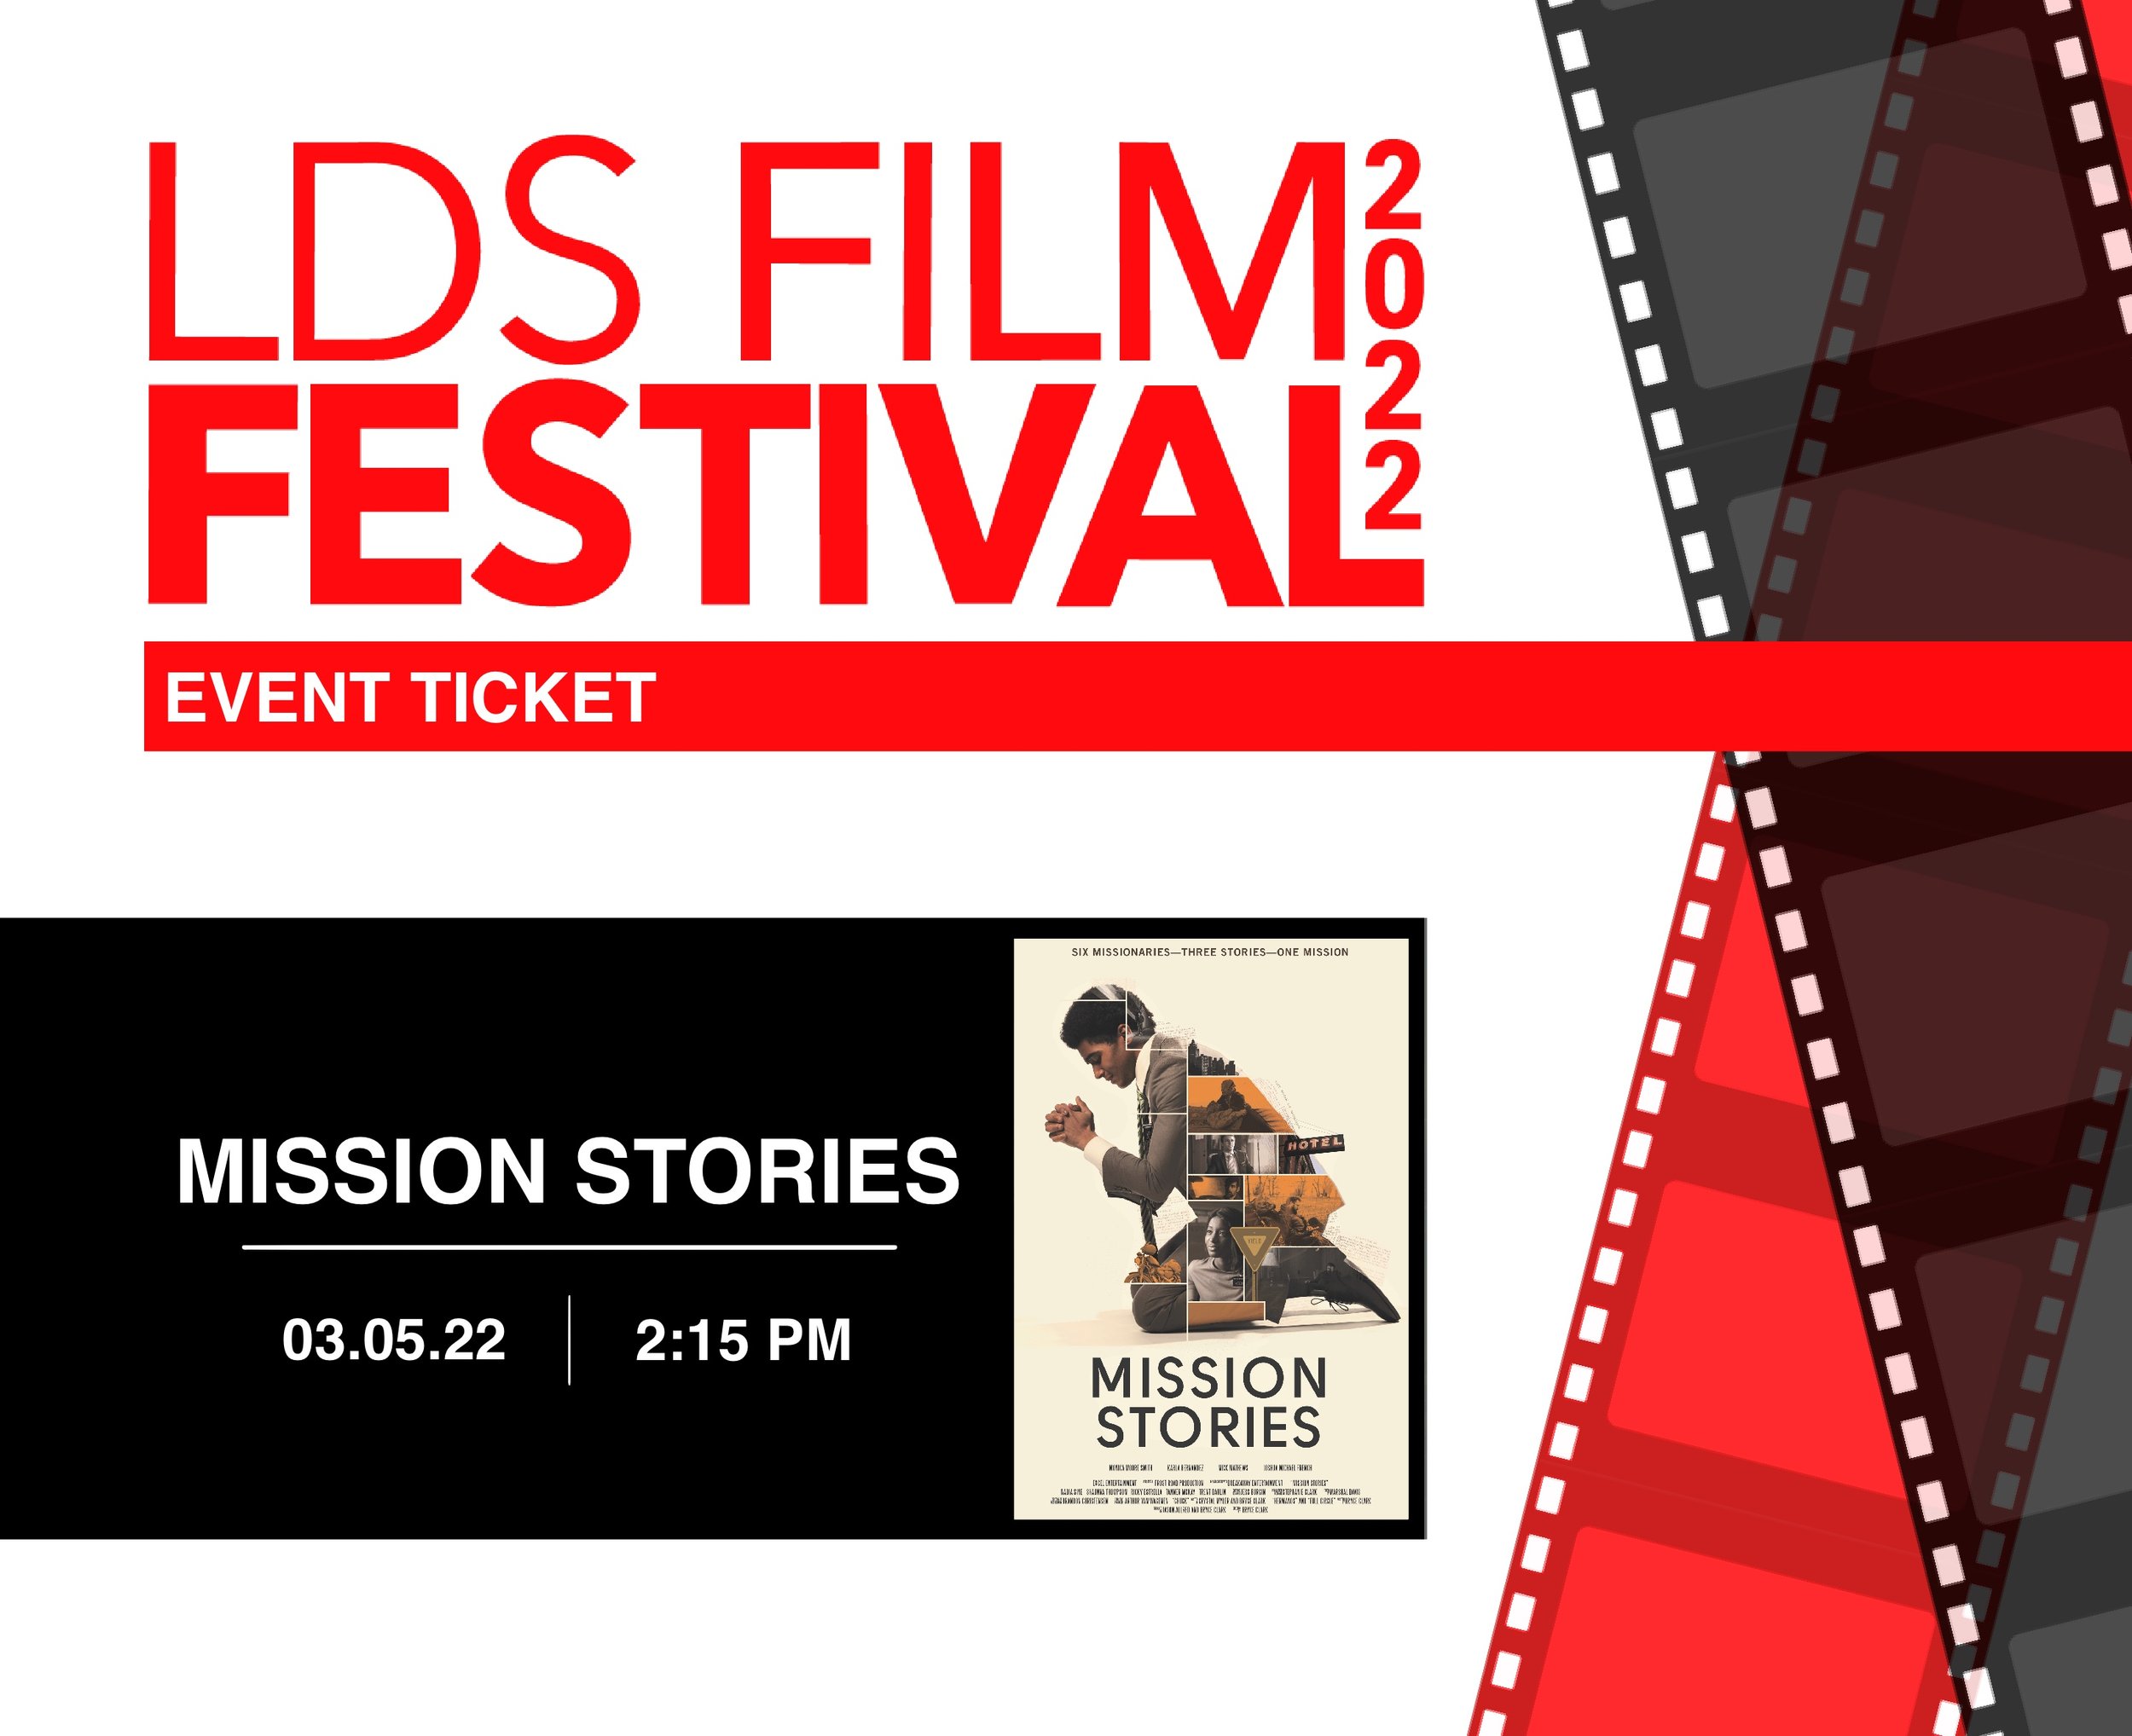 Mission Stories03.05.22 | 2:15 PM Showhouse II Theatre - Three short anthology films explore the emotional and spiritual depths of full time missionary service.Q&A with filmmakers